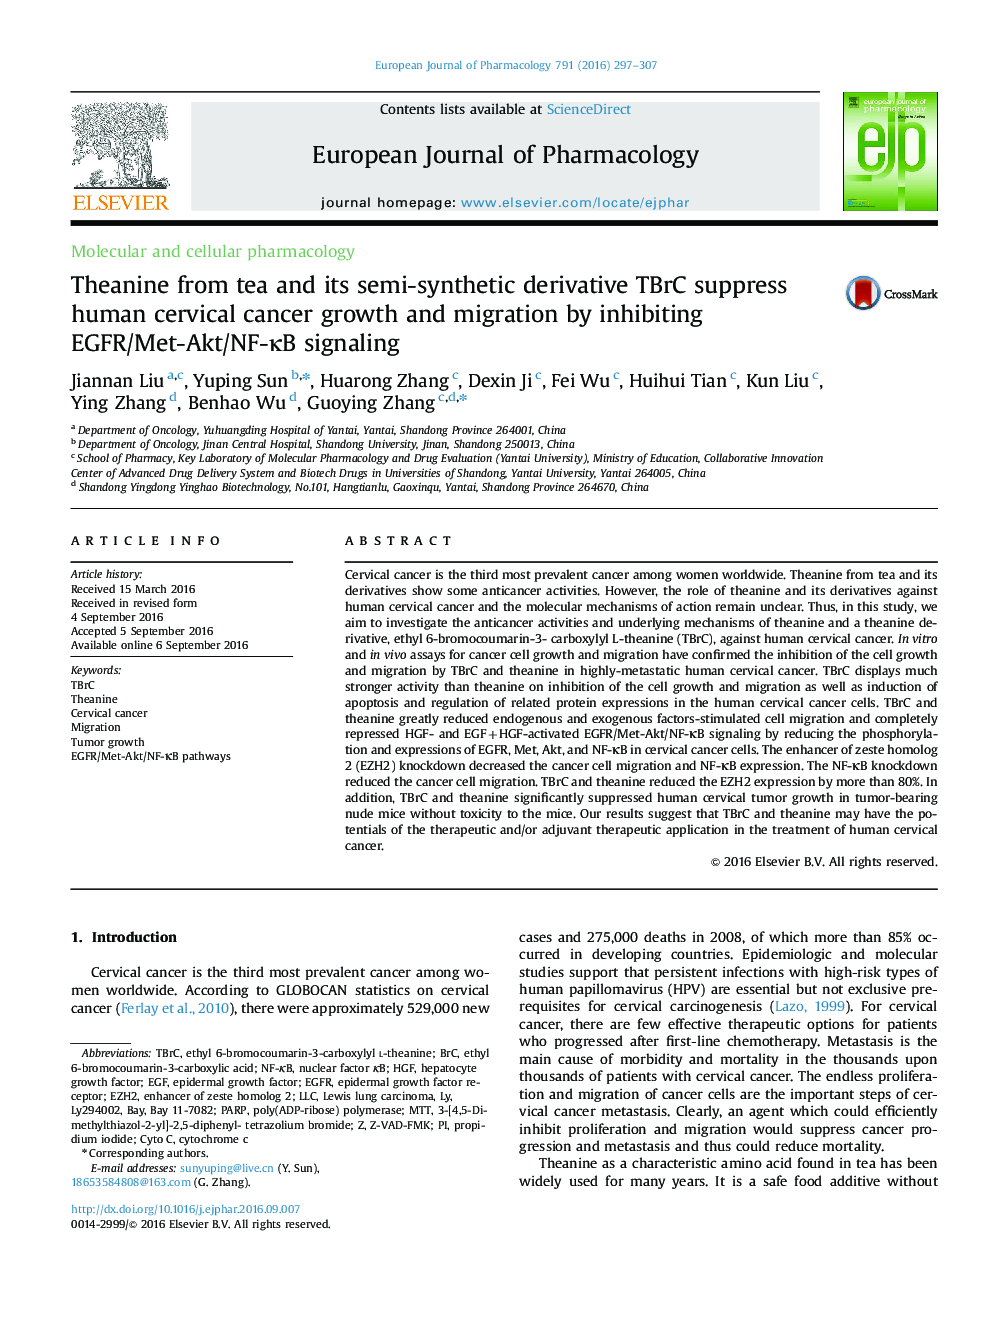 Theanine from tea and its semi-synthetic derivative TBrC suppress human cervical cancer growth and migration by inhibiting EGFR/Met-Akt/NF-ÎºB signaling